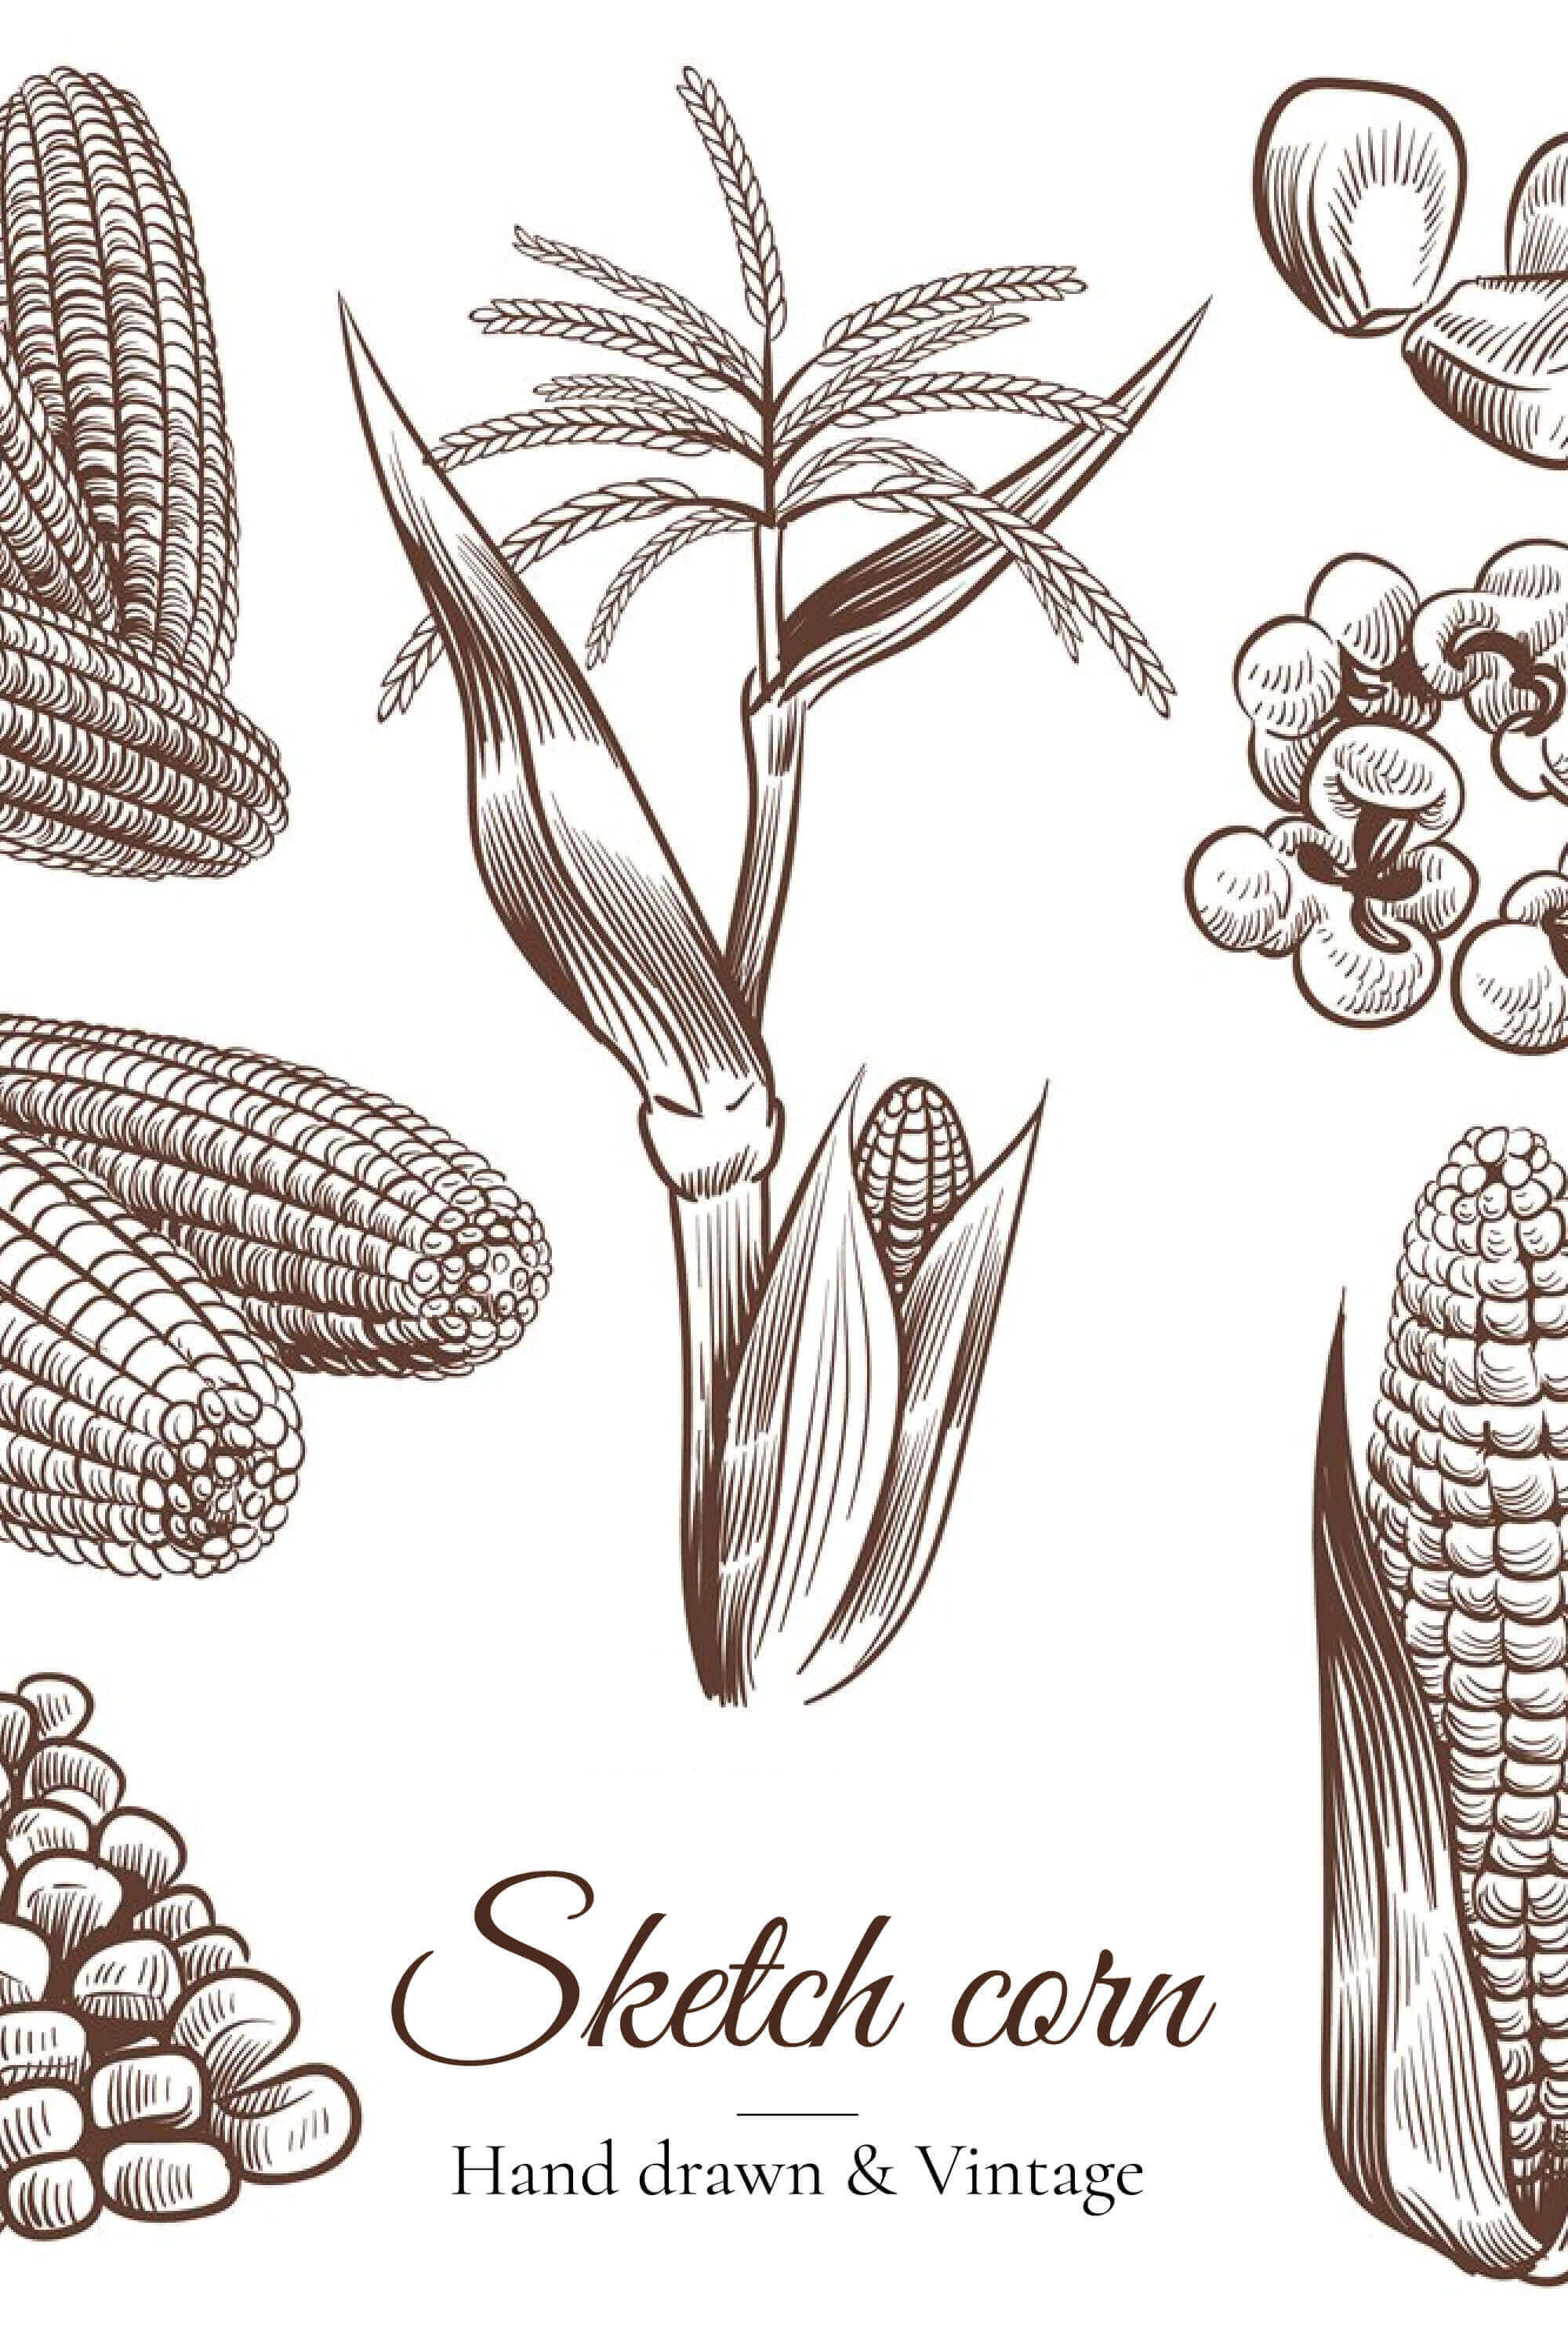 Vintage image of corn on a white background.